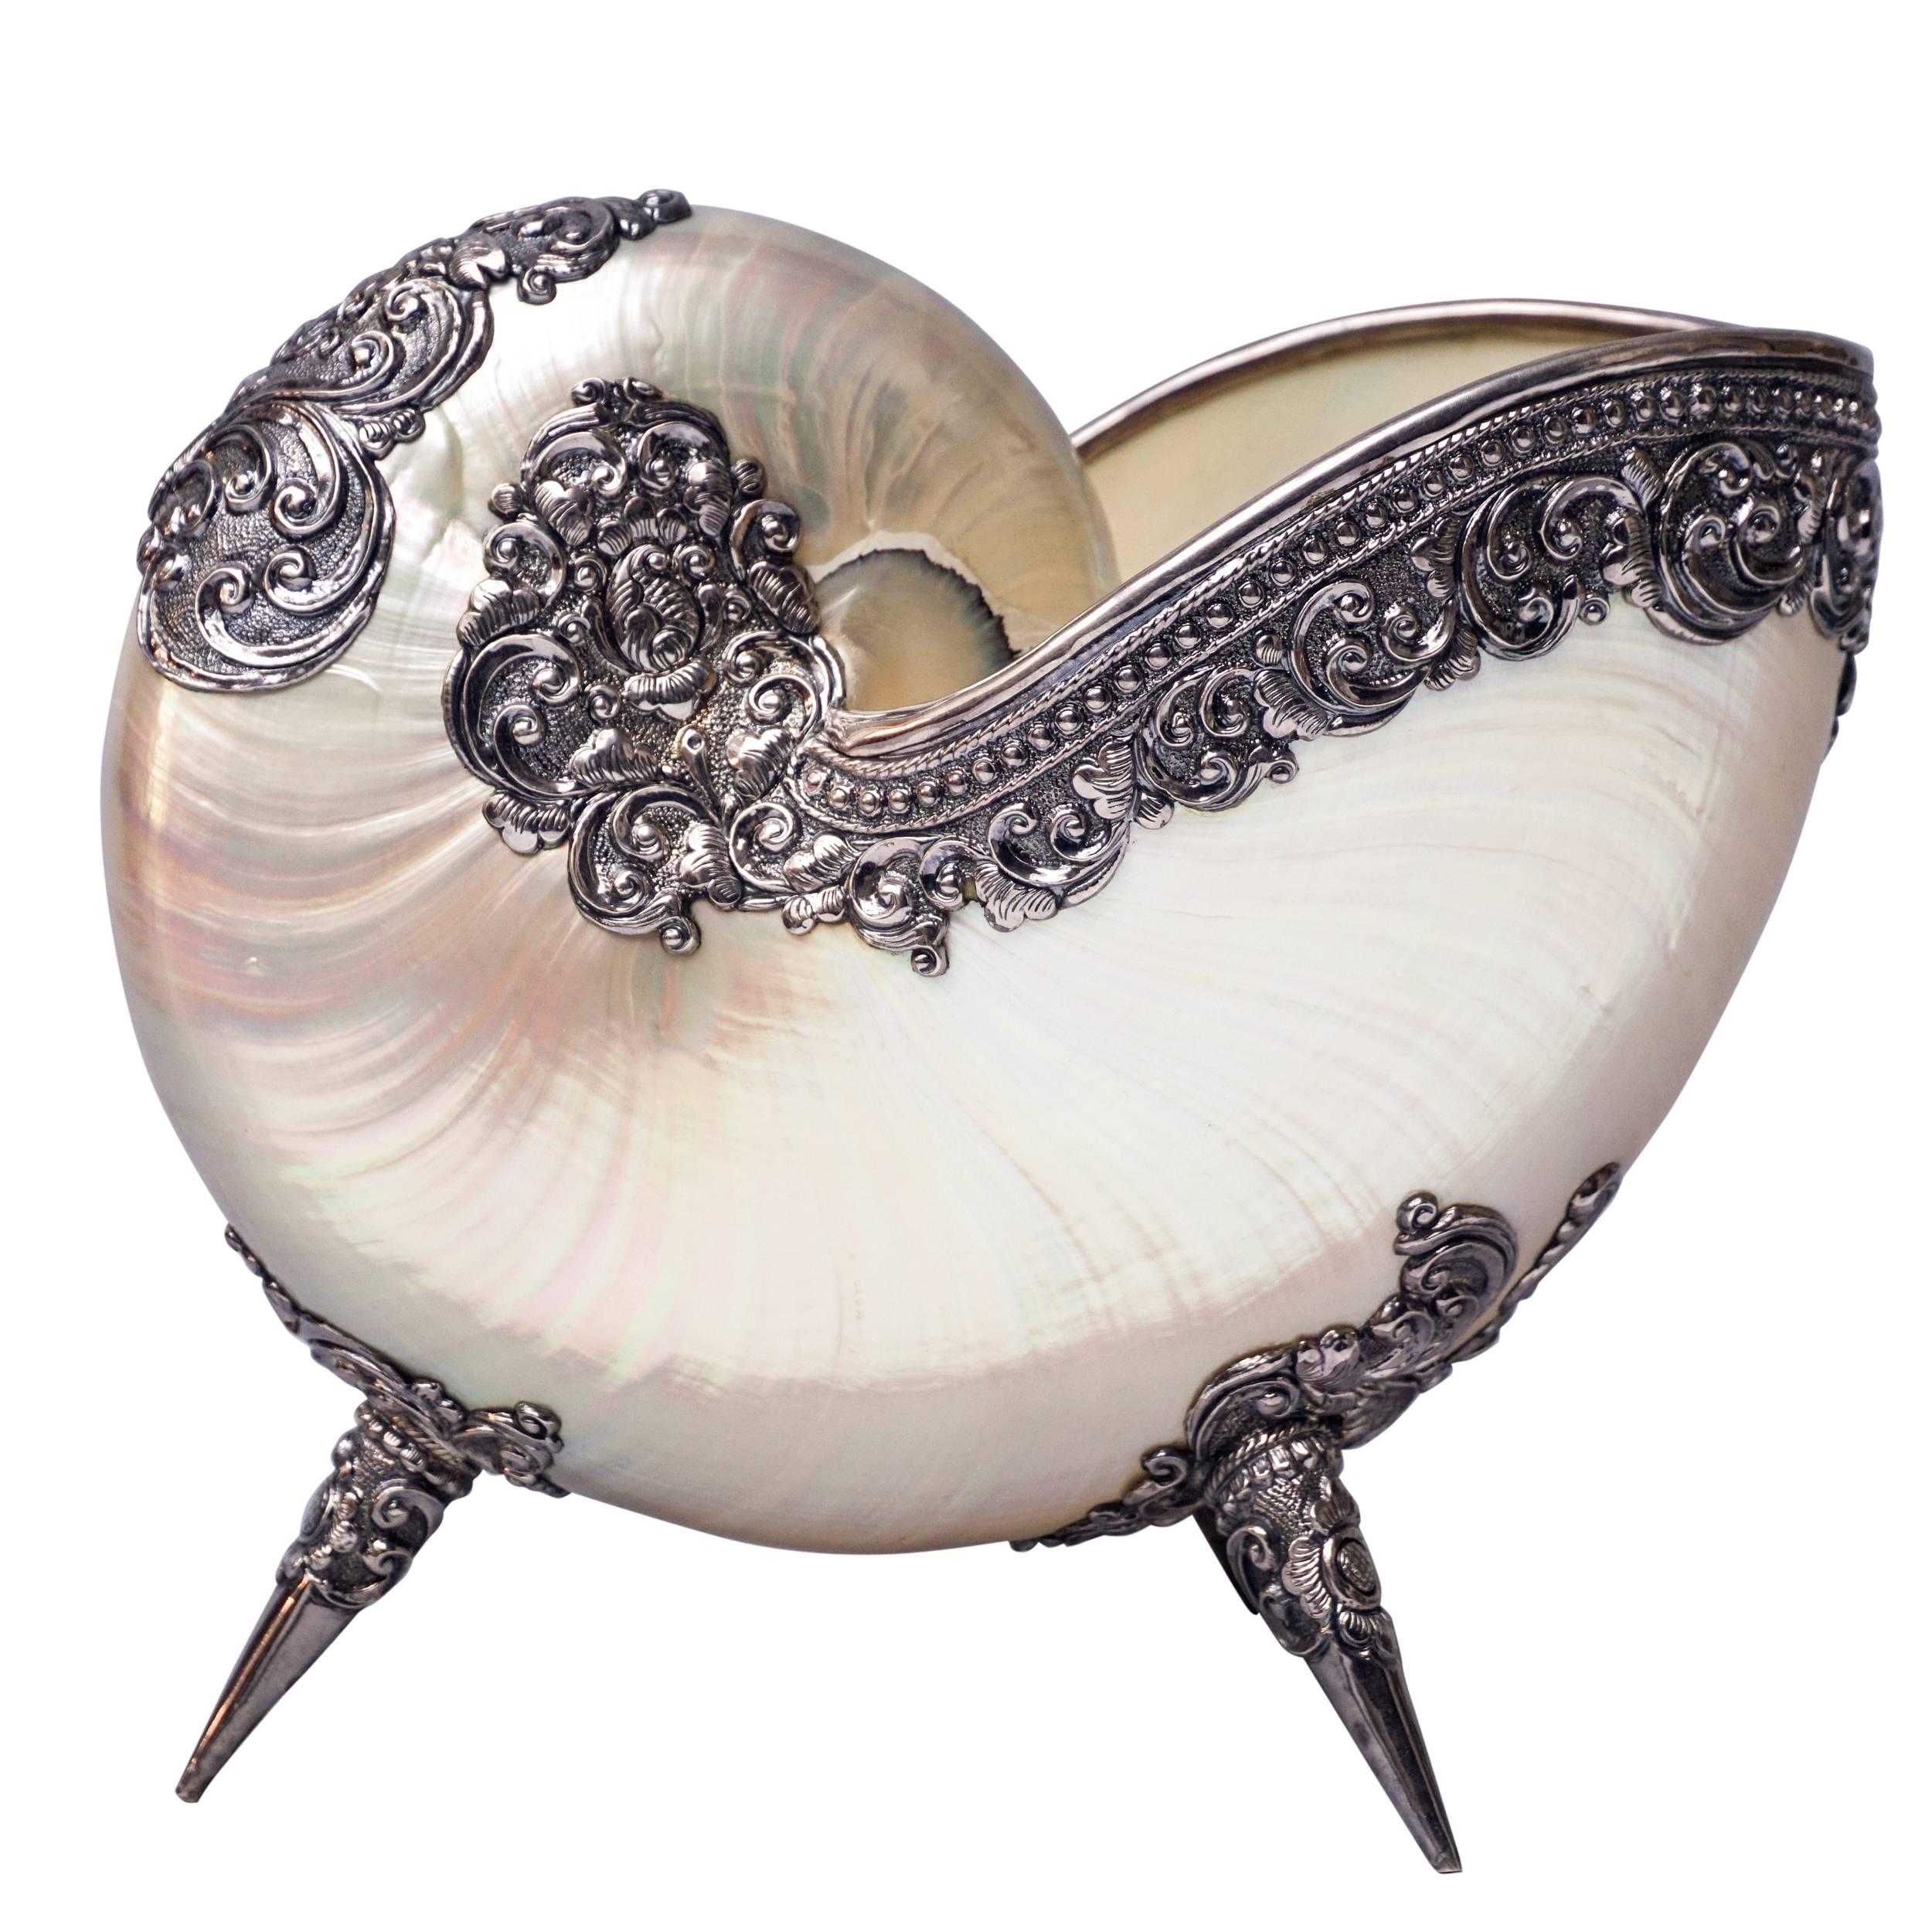 Large Pearlescent Nautilus Shell with Repoussé Silver